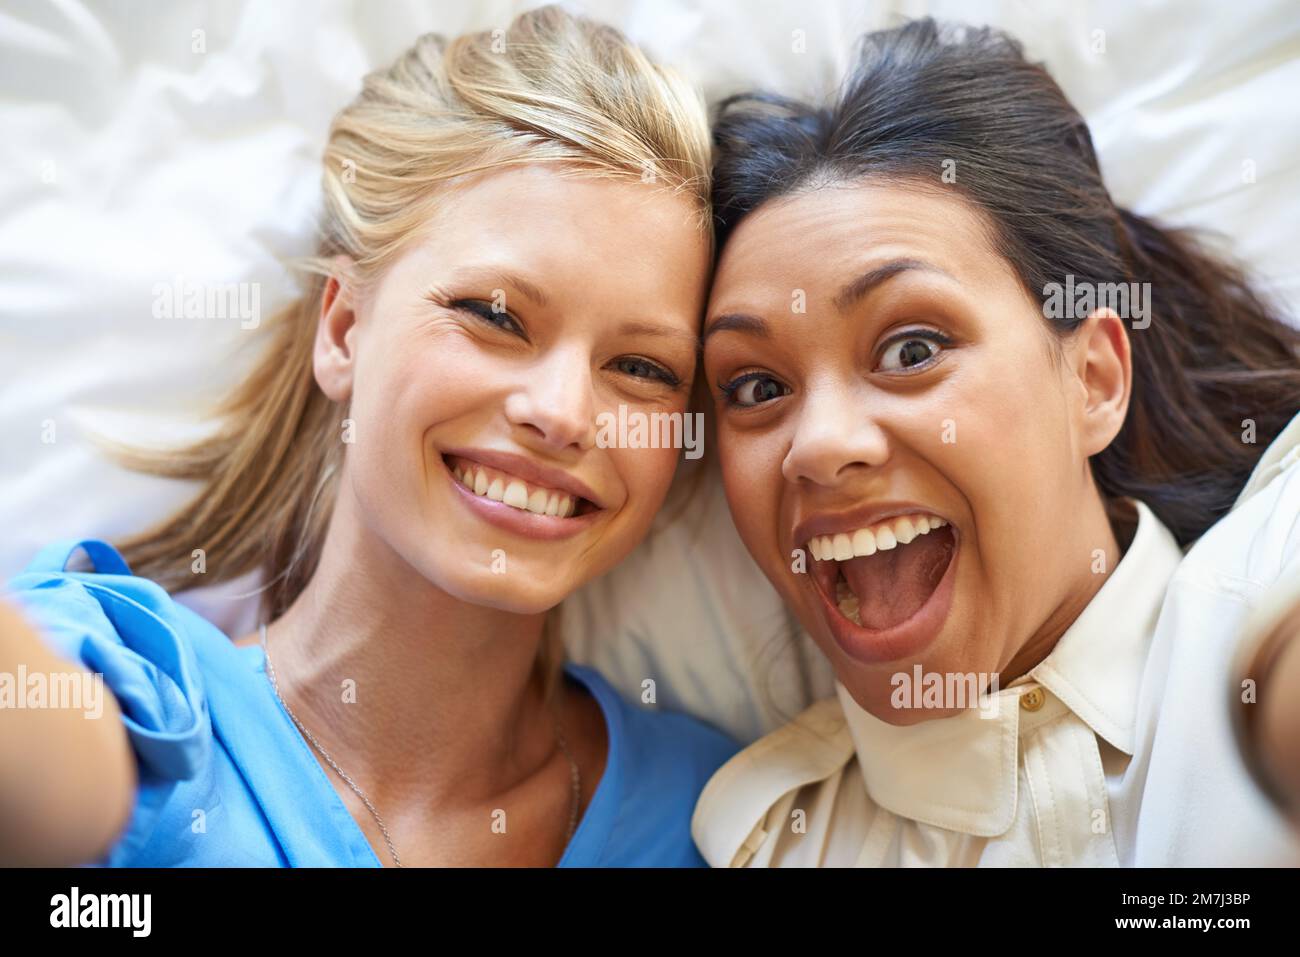 Look happy. High angle portrait of two attractive young women taking selfies while lying on a bed. Stock Photo